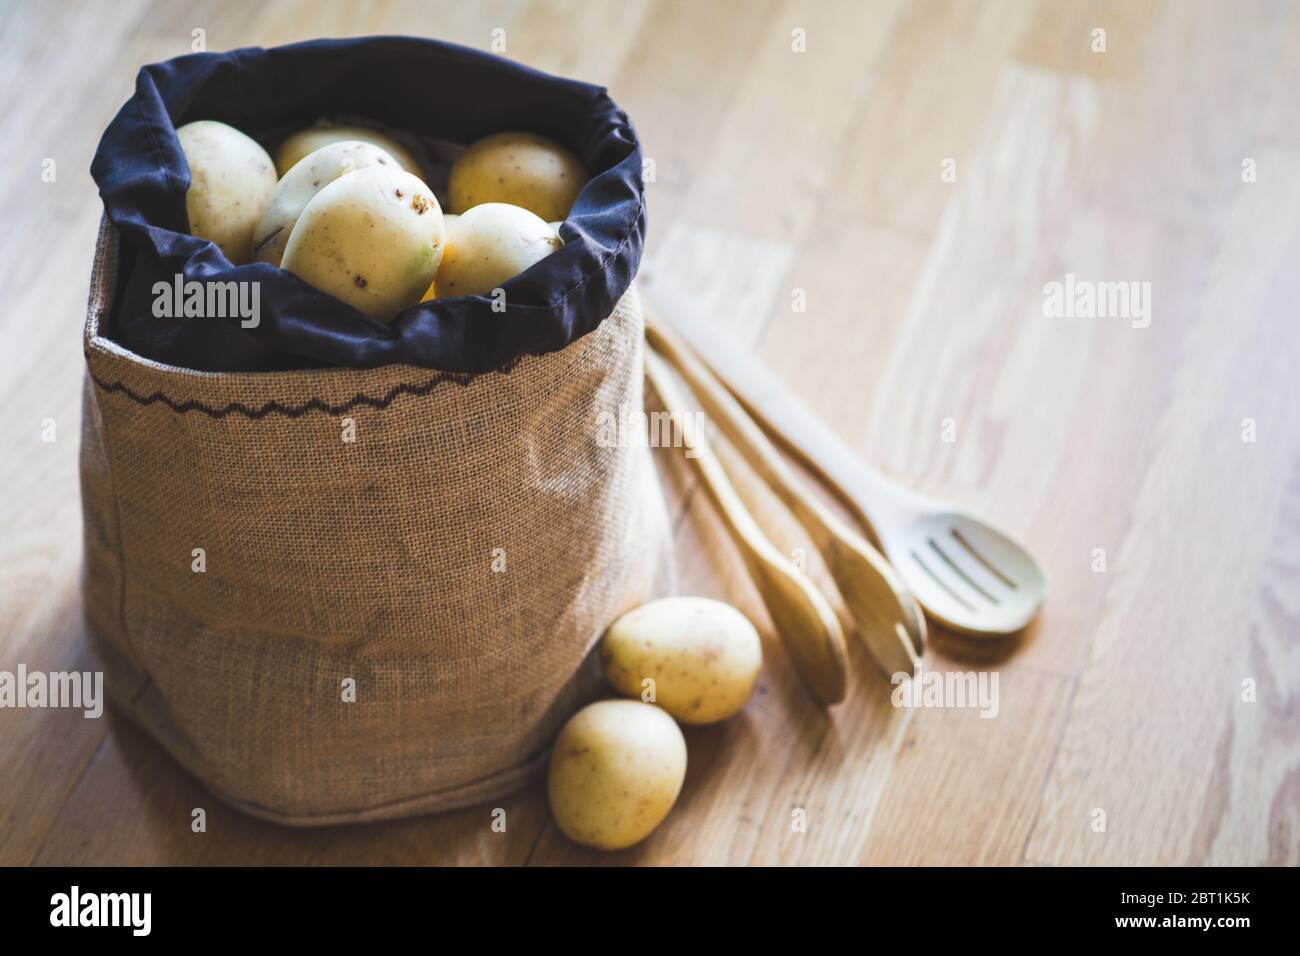 Raw potato food. Fresh potatoes in an old sack on wooden background. Top view Stock Photo